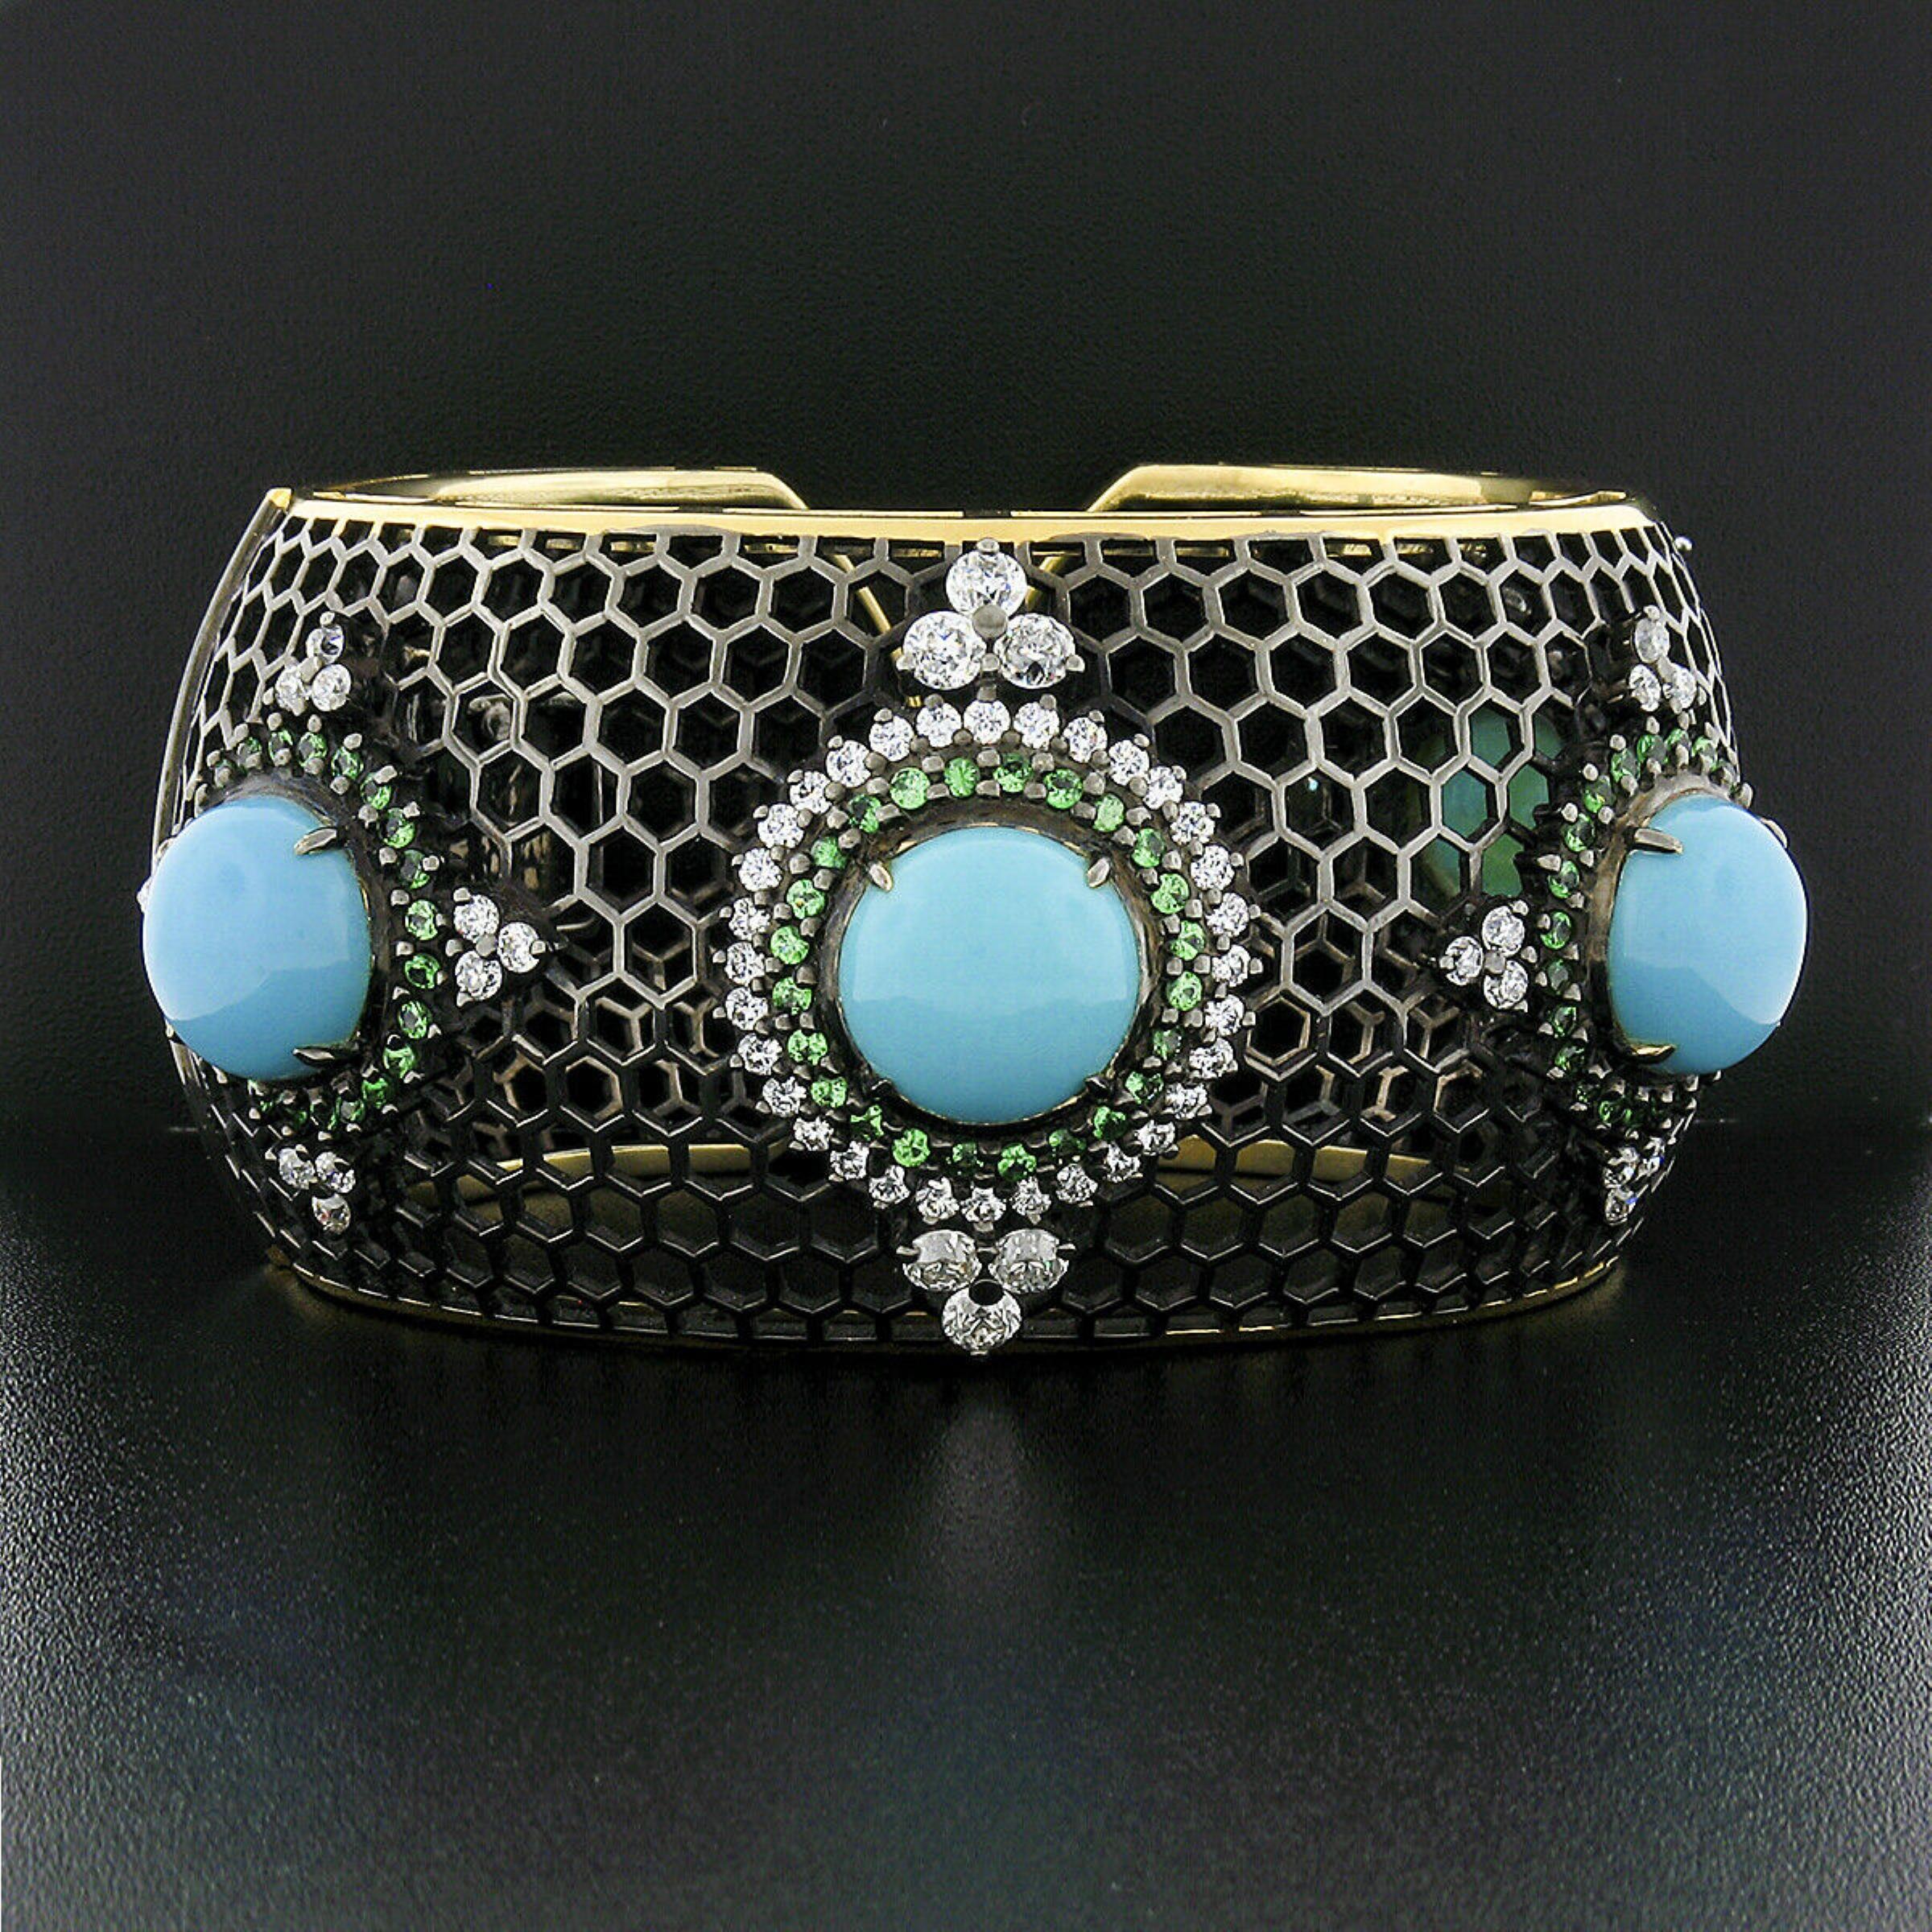 Here we have a very unique, wide open cuff bracelet crafted in solid 18k yellow gold with almost the entire piece being dipped in black rhodium except for the sides. The wide bracelet has an open honeycomb design featuring five turquoise stations